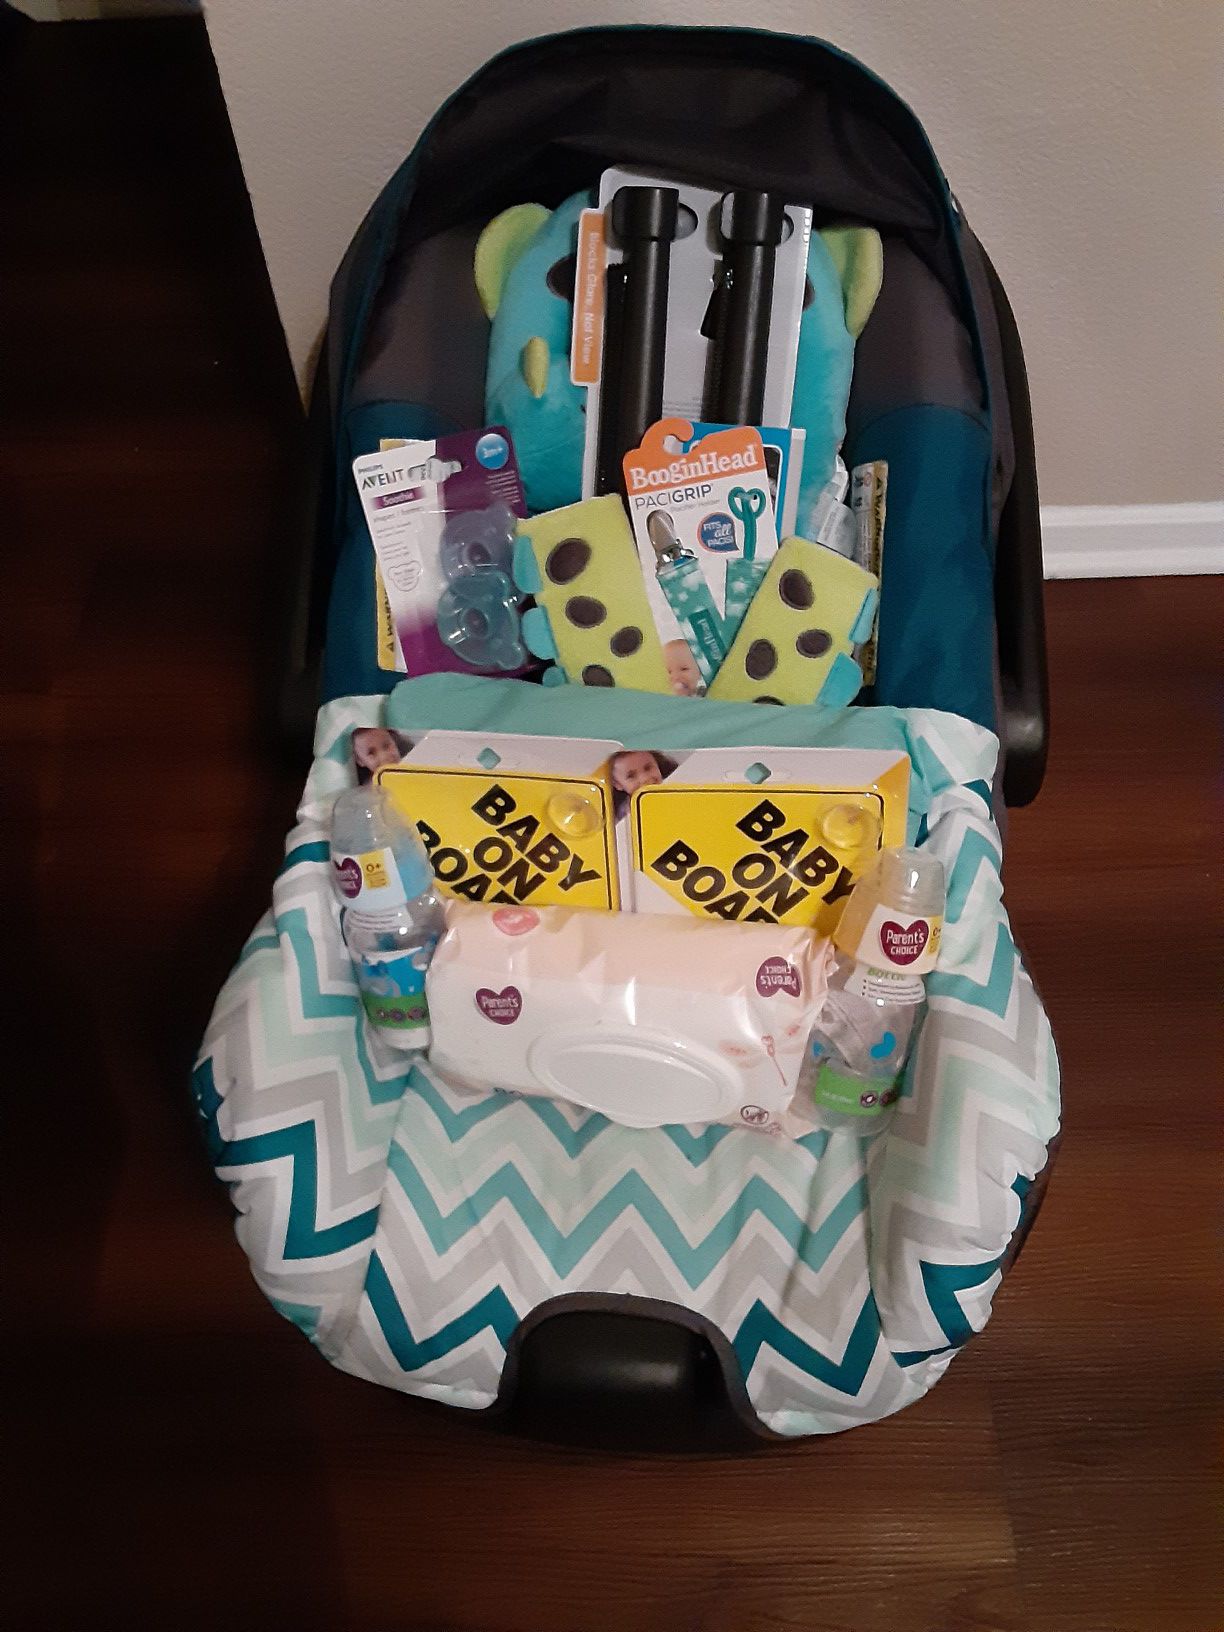 Baby car seat and accessories